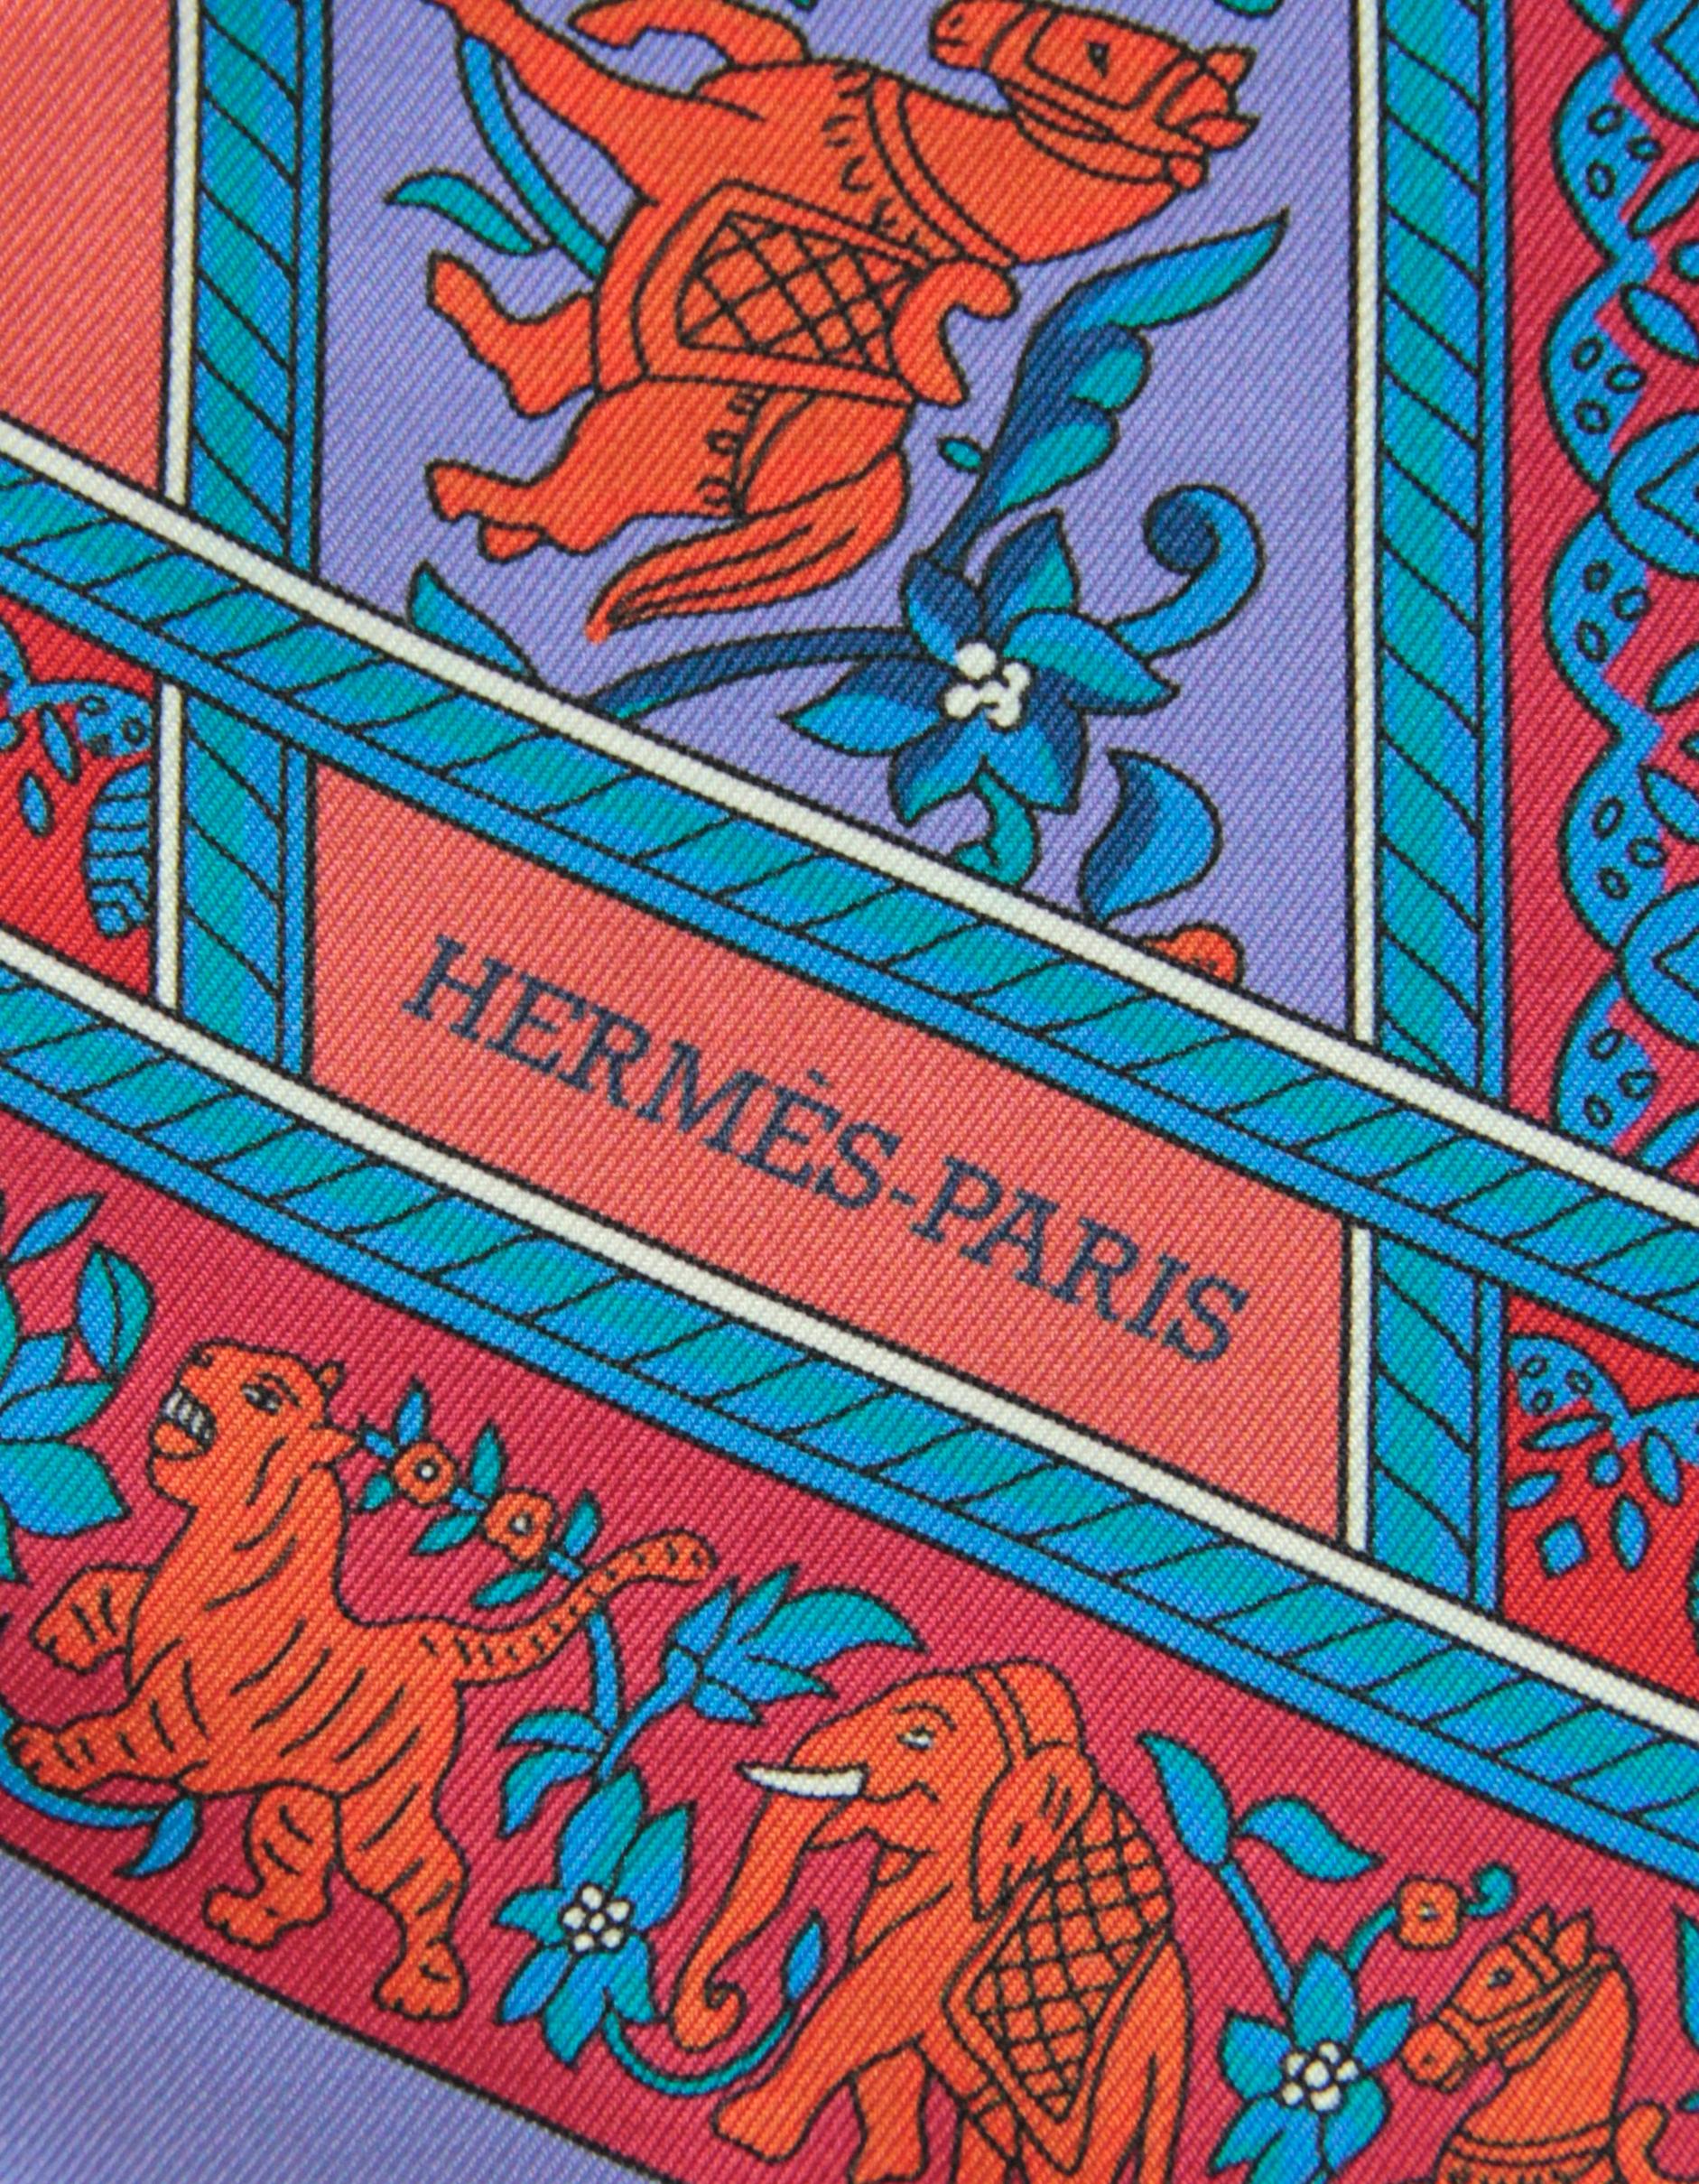 Hermes Red/ Blue Chasse en Inde (Hunt in India) Silk Maxi Twilly Scarf. Print features tigers, elephants, camels, birds and horses being hunted. 
Made In: France
Color: Red, blue, periwinkle
Materials: 100% silk
Overall Condition: Excellent